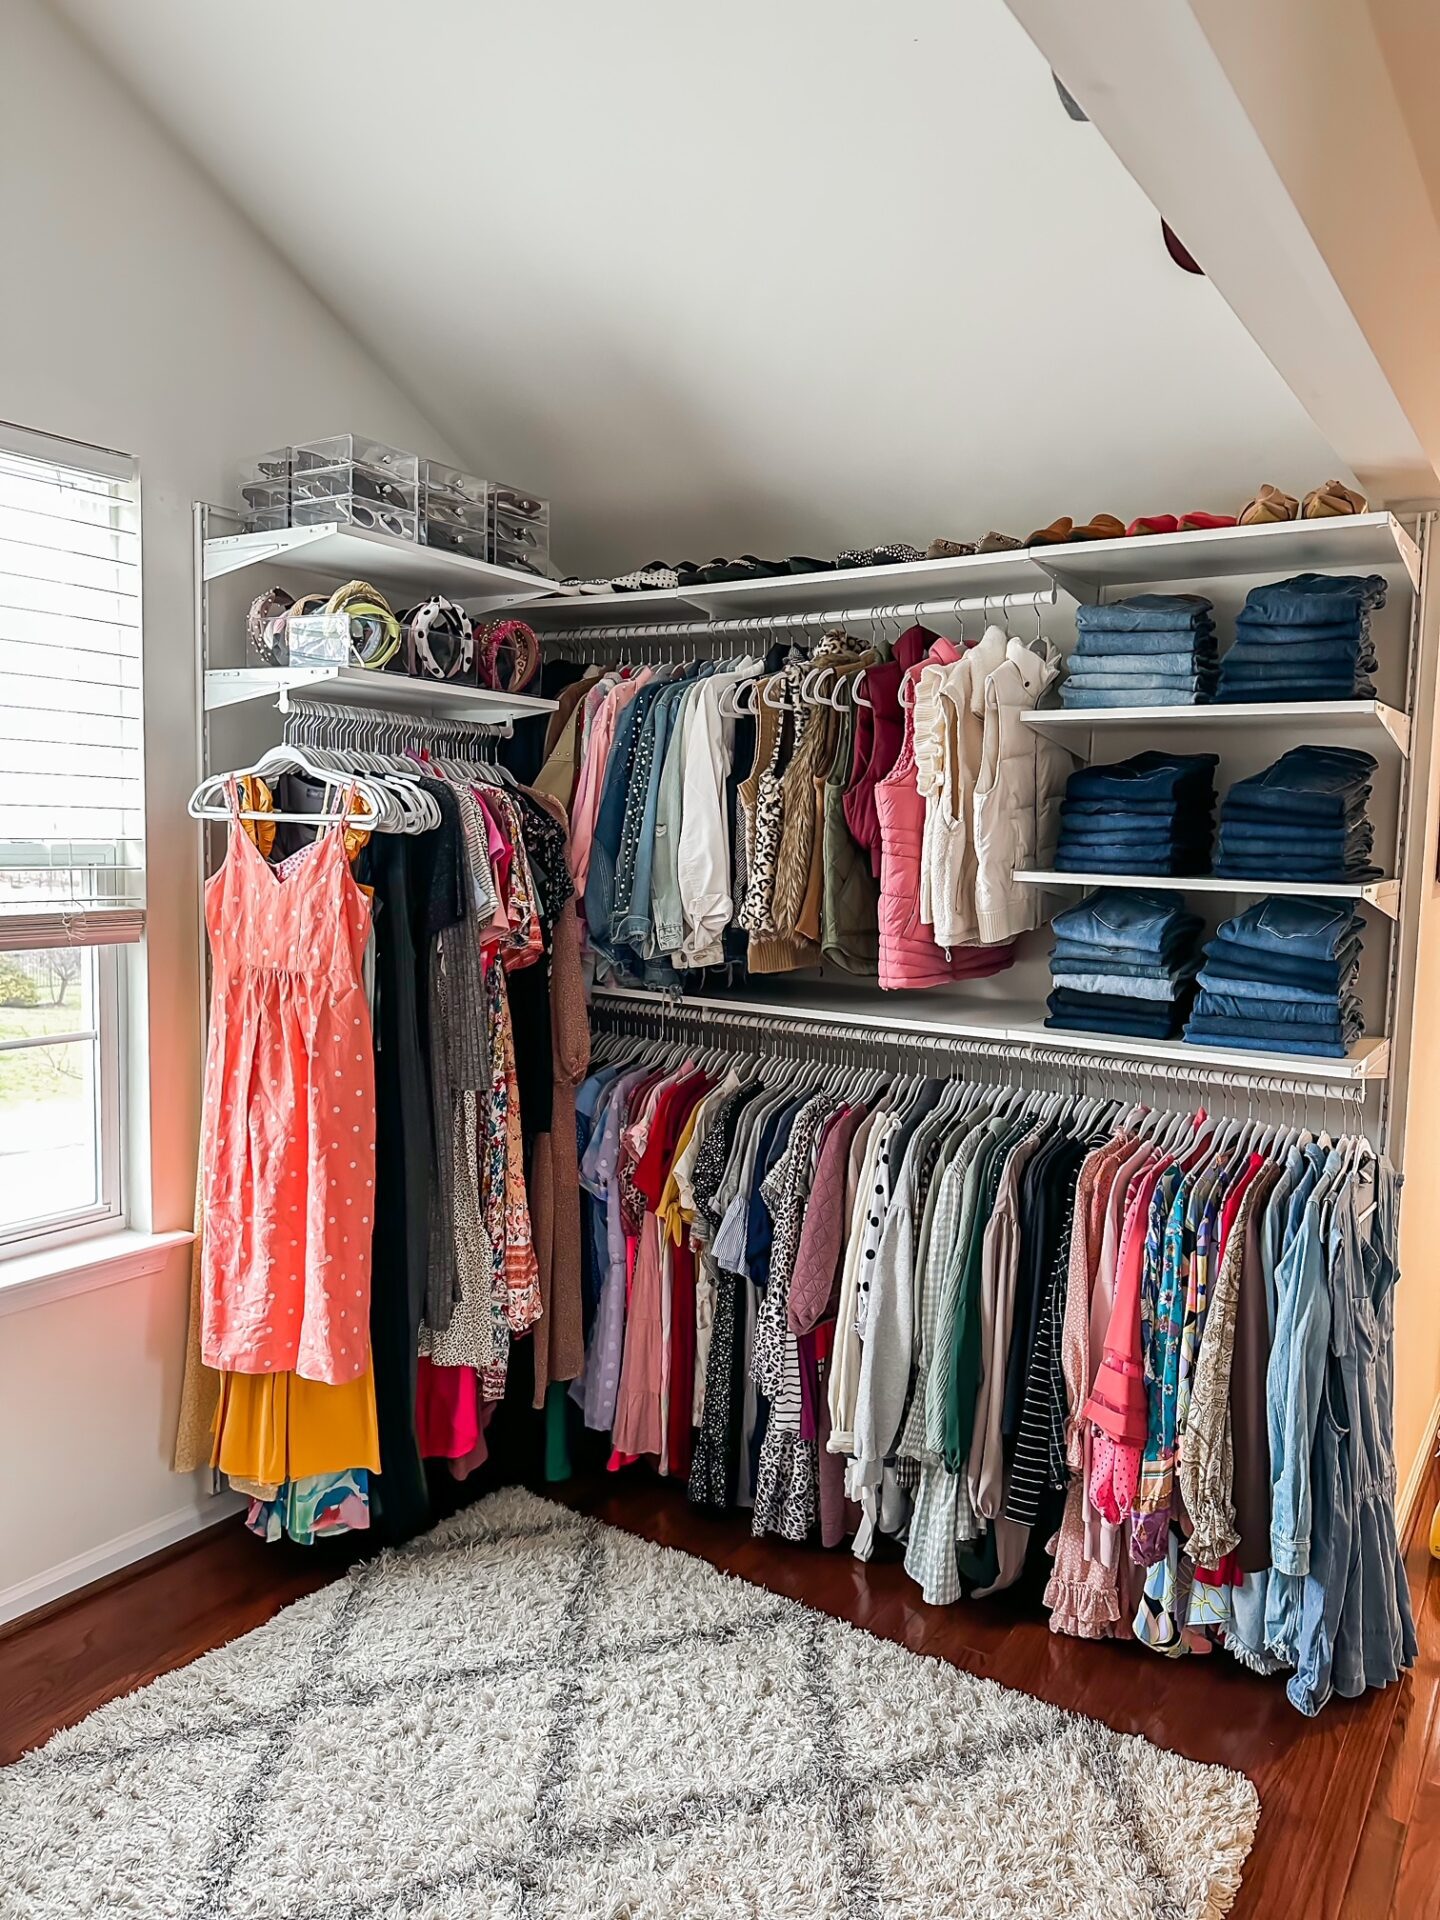 MASTER CLOSET MAKEOVER - An incredible before-and-after closet transformation and master closet organization project with luxury Philadelphia professional organizers, The Organized Home Co.